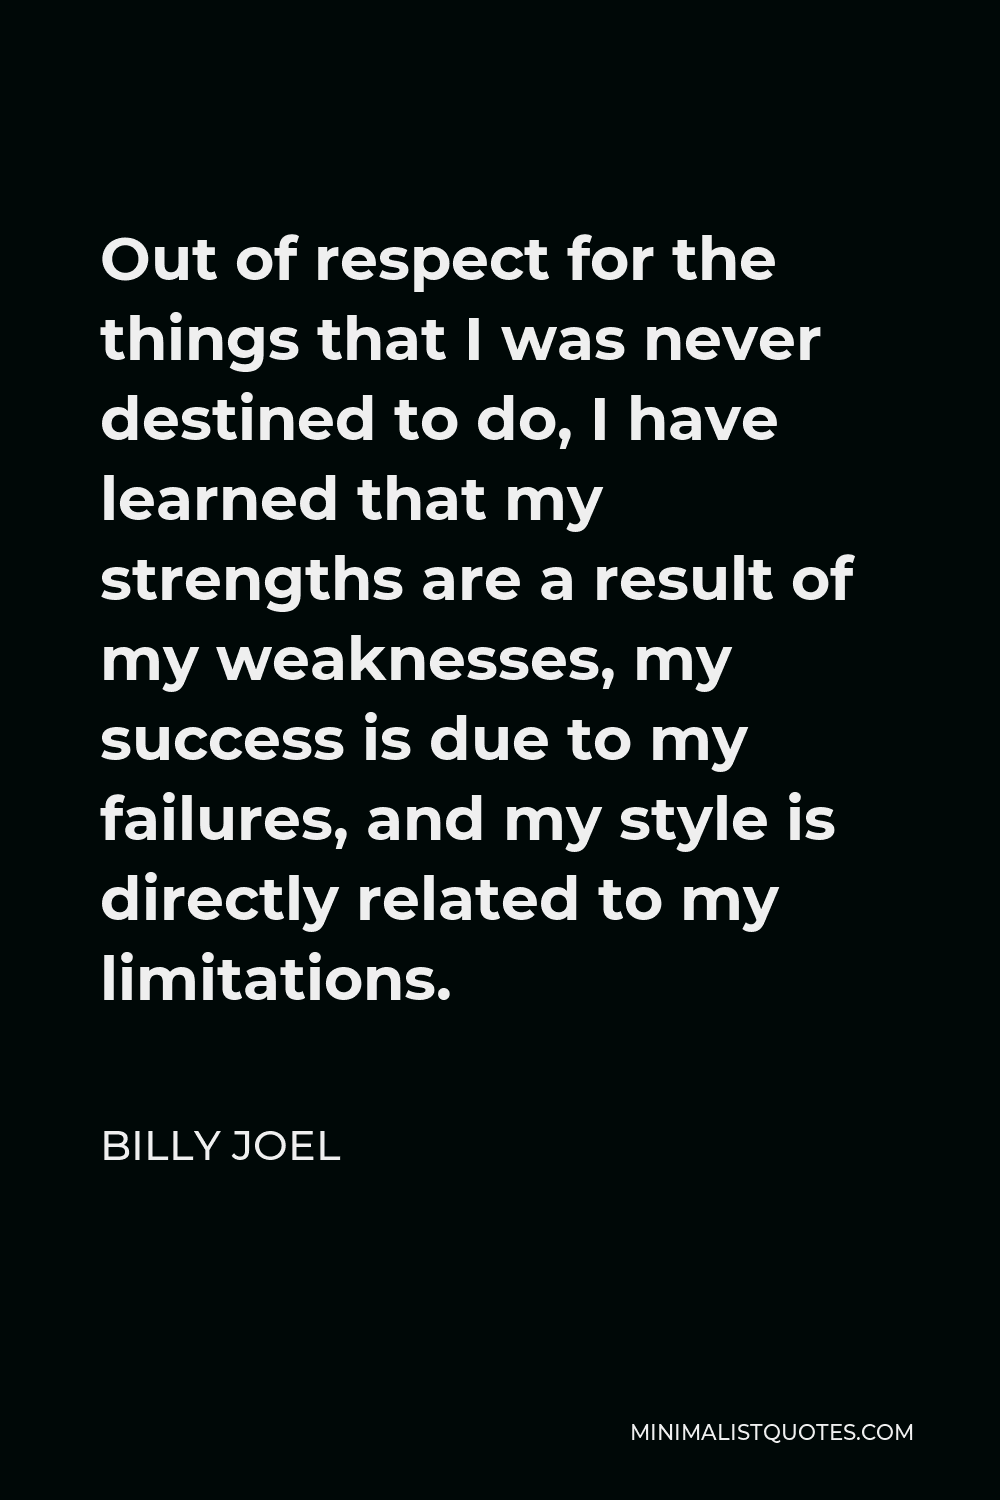 Billy Joel Quote - Out of respect for the things that I was never destined to do, I have learned that my strengths are a result of my weaknesses, my success is due to my failures, and my style is directly related to my limitations.